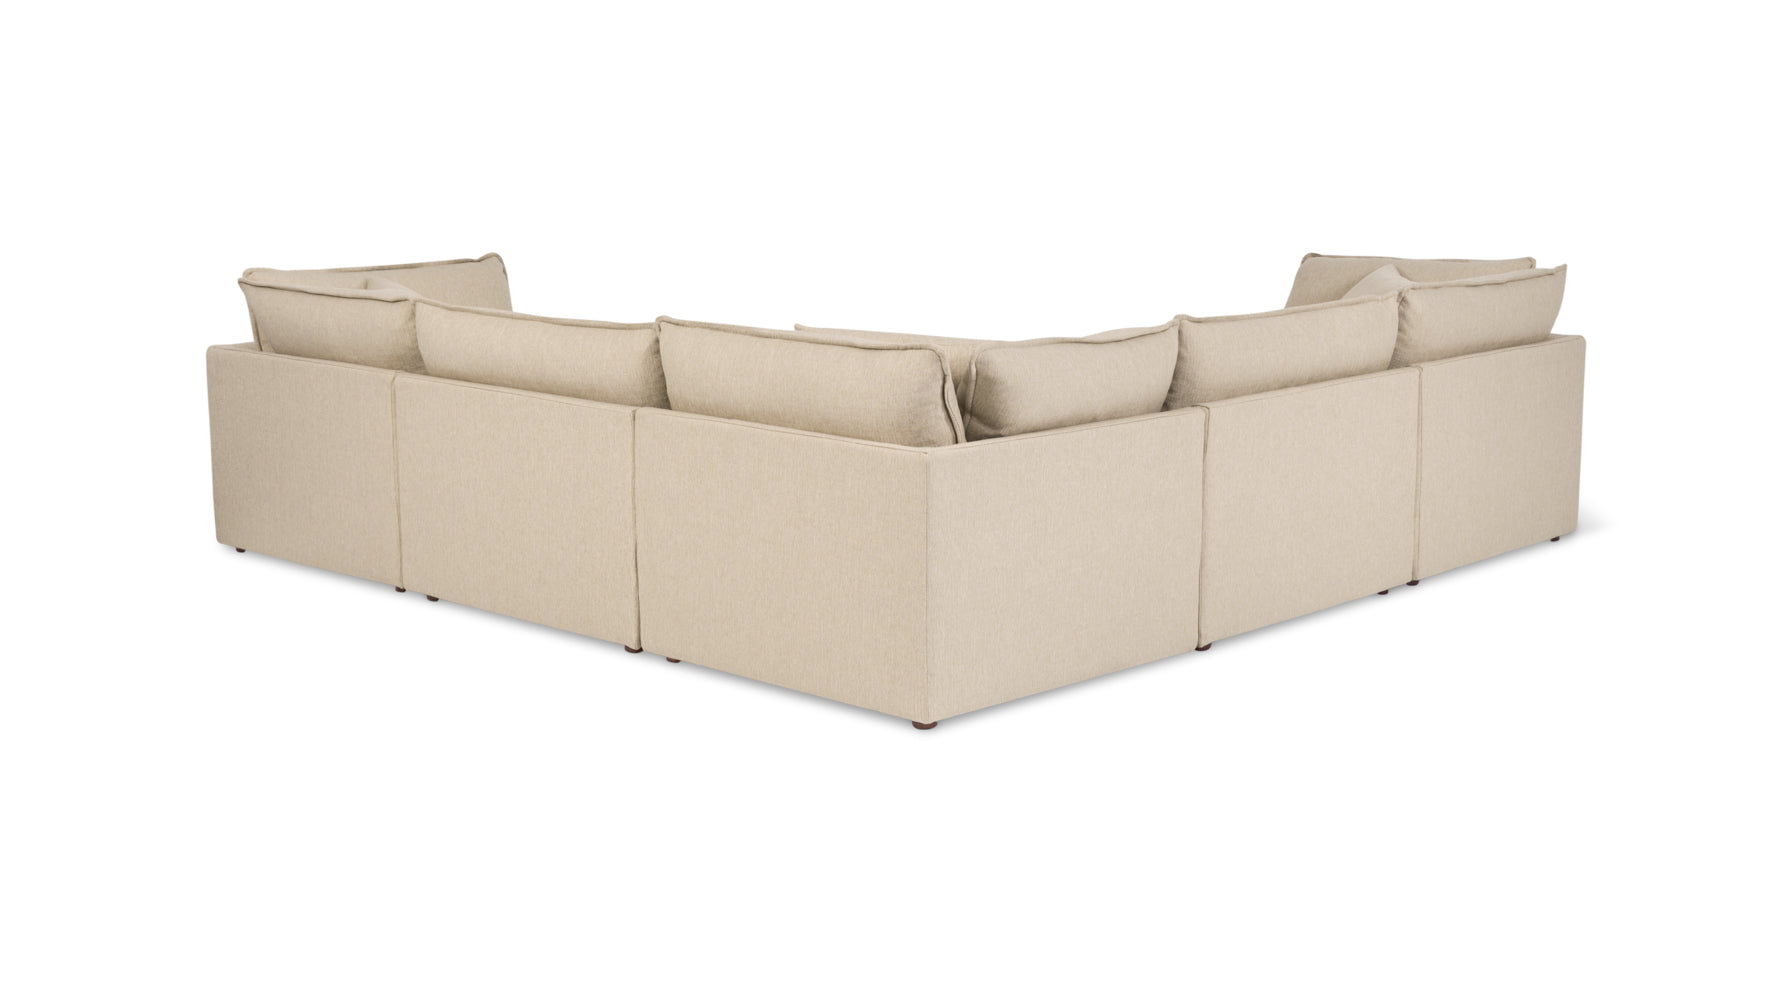 Chill Time 5-Piece Modular Sectional Closed, Biscuit - Image 4